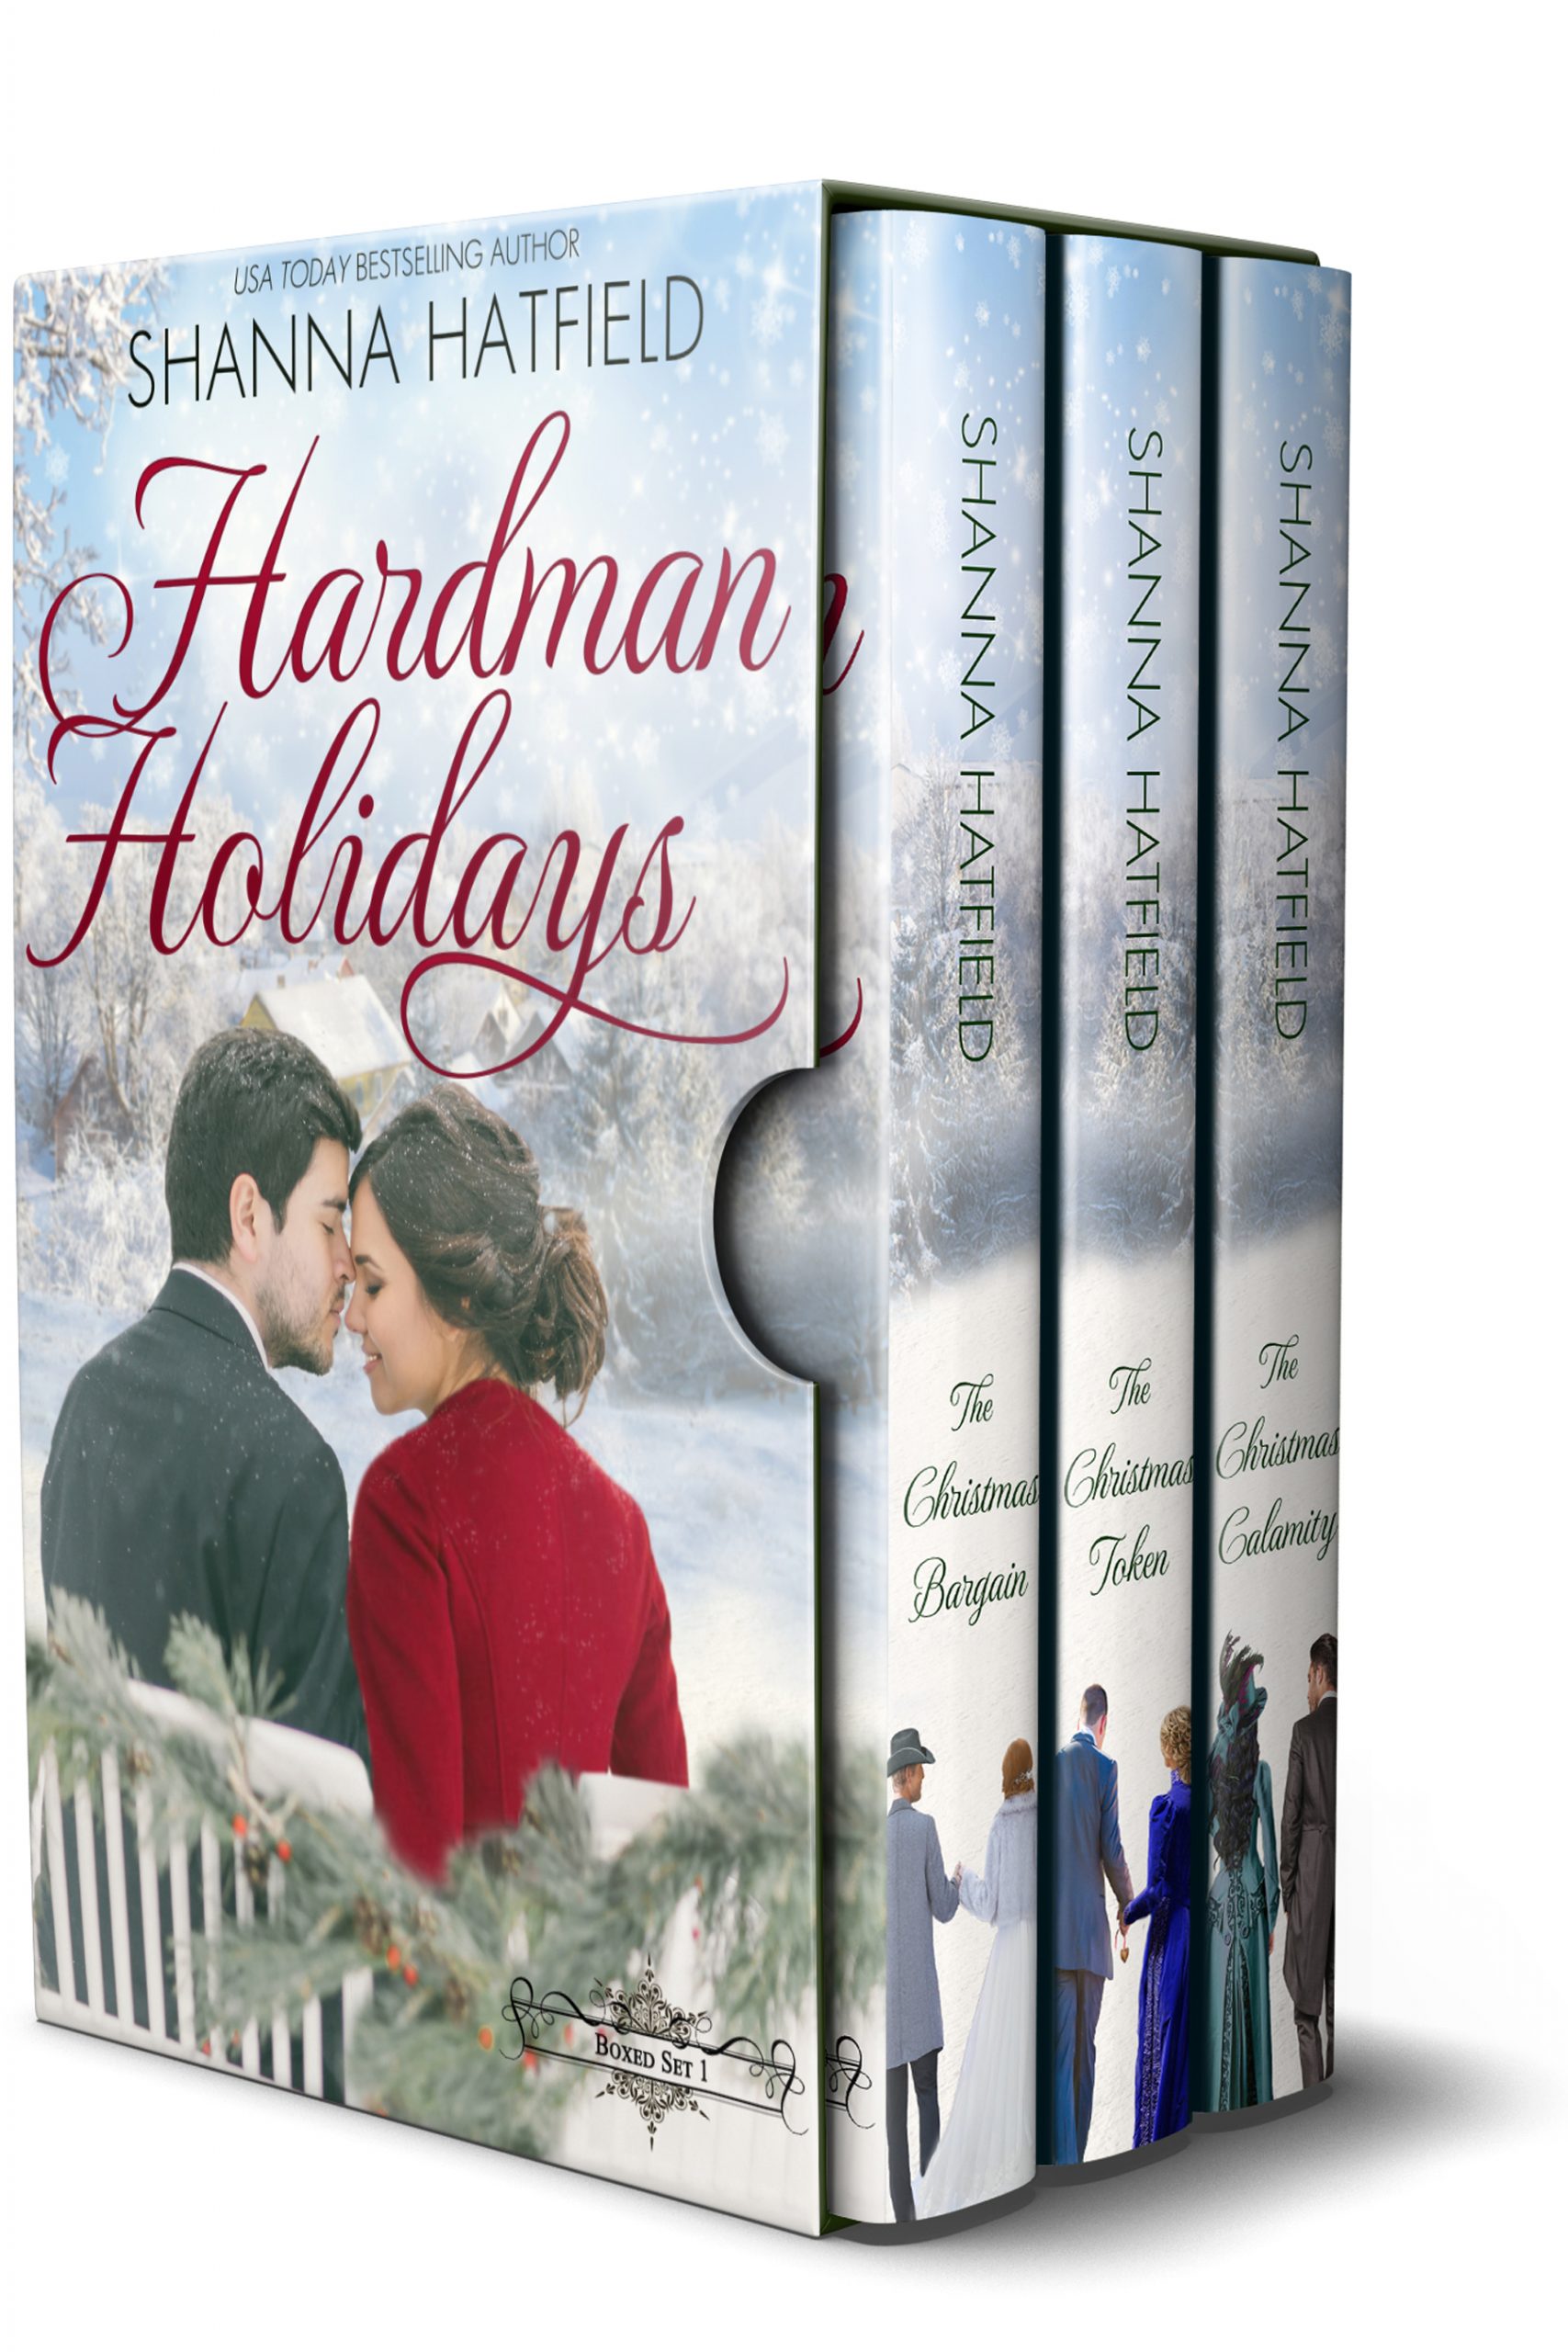 Hardman-Holidays-3d-Boxed-set-cover-scaled